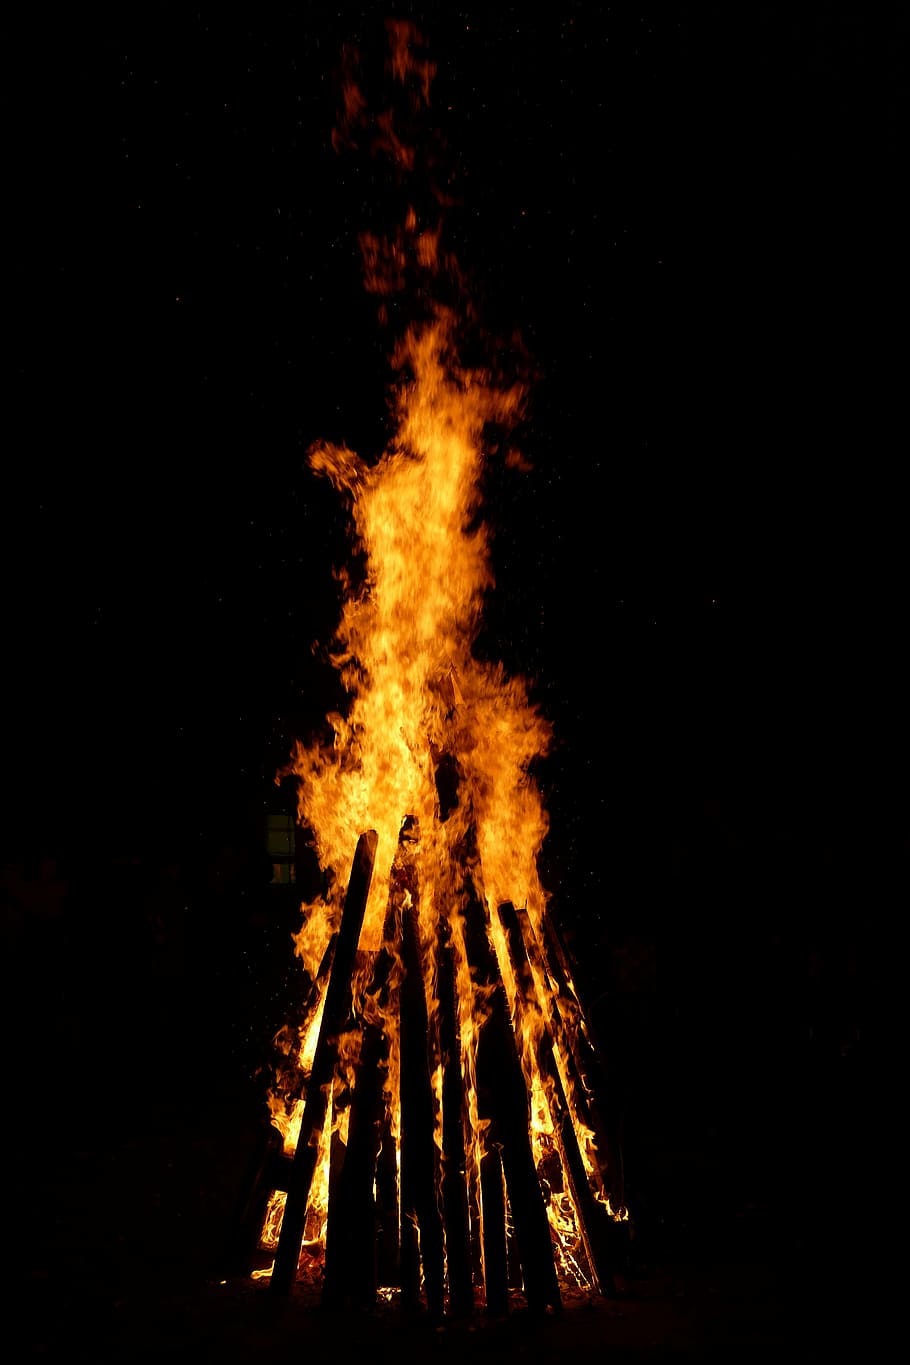 bonfire during night, fire, flame, wood, burn, wood fire, brand, night, darkness, embers